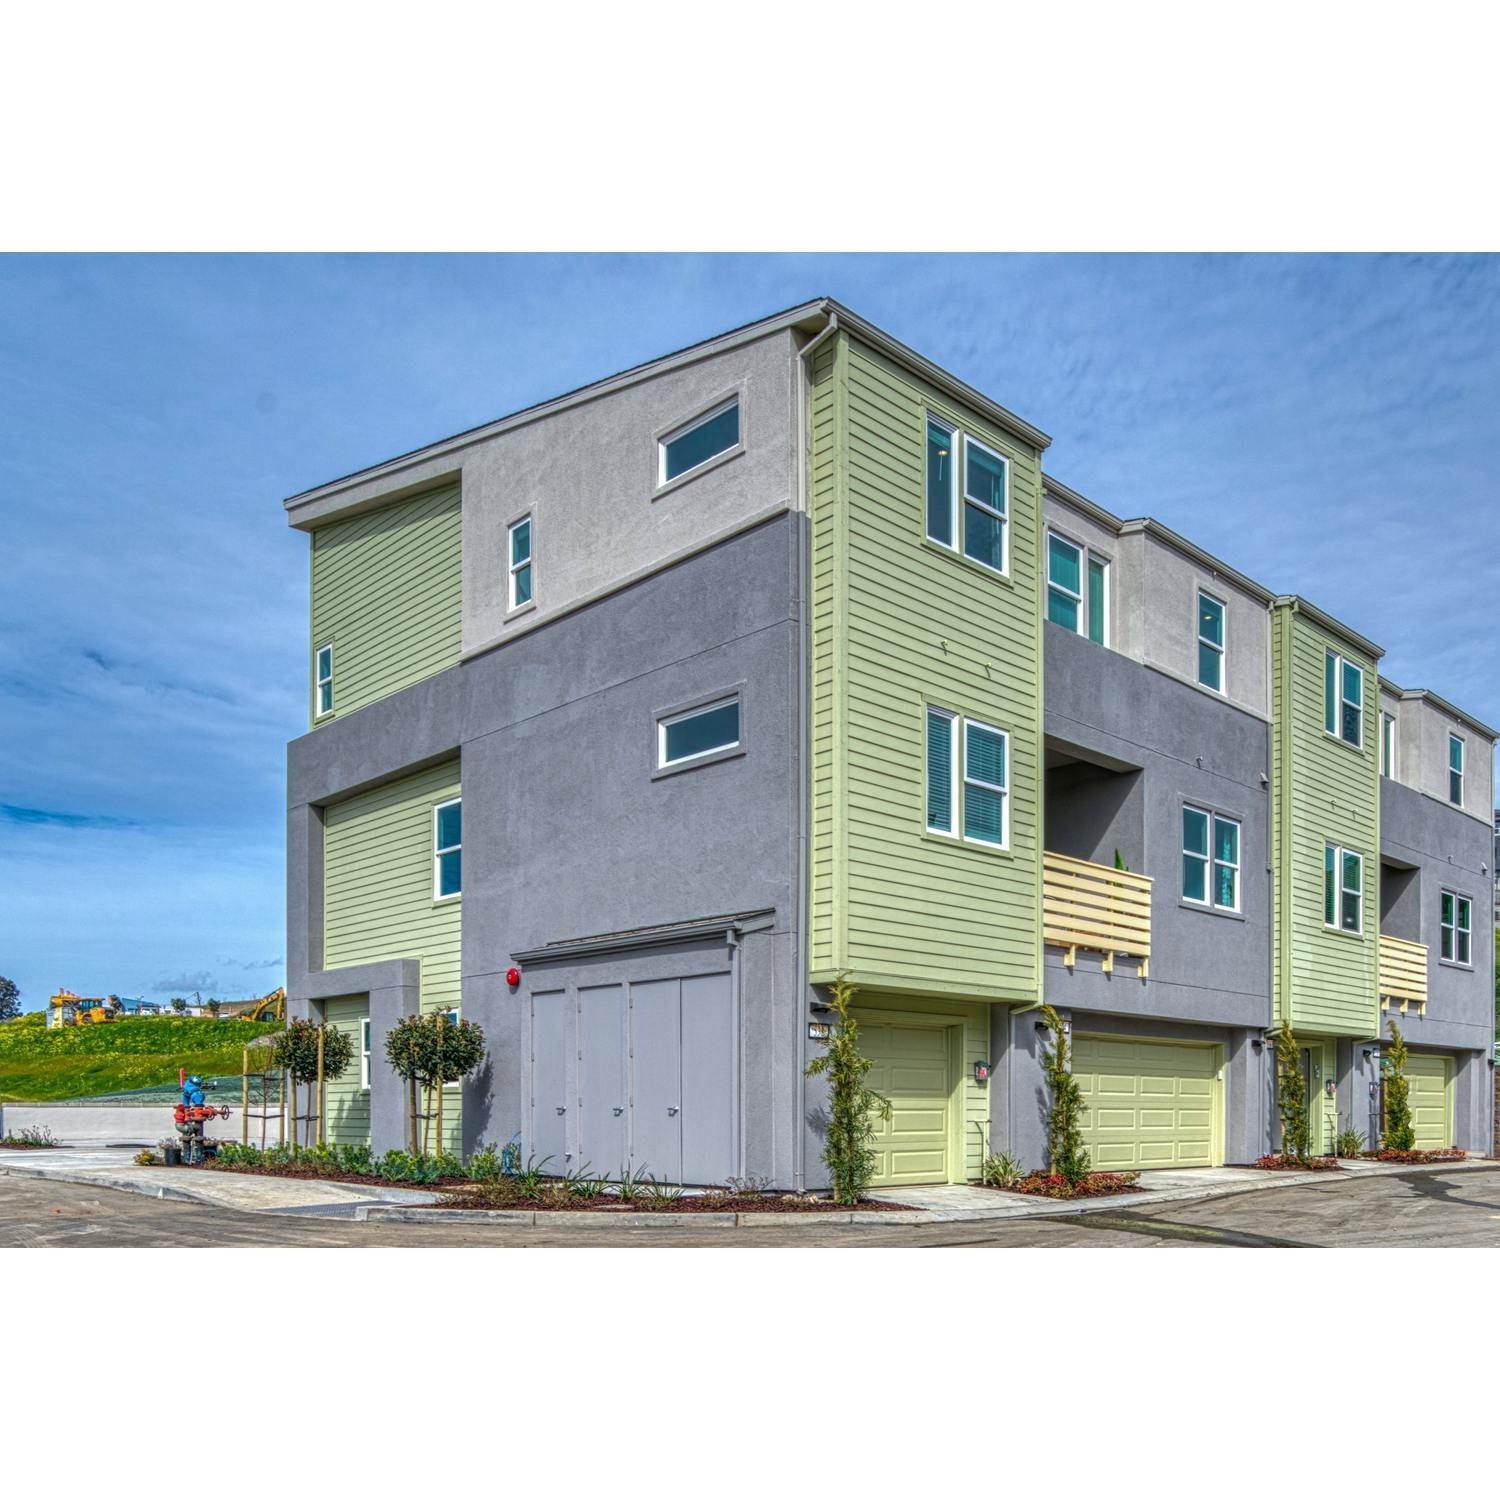 8. HayPark at SoMi xây dựng tại 29212 Mission Boulevard, Hayward, CA 94544